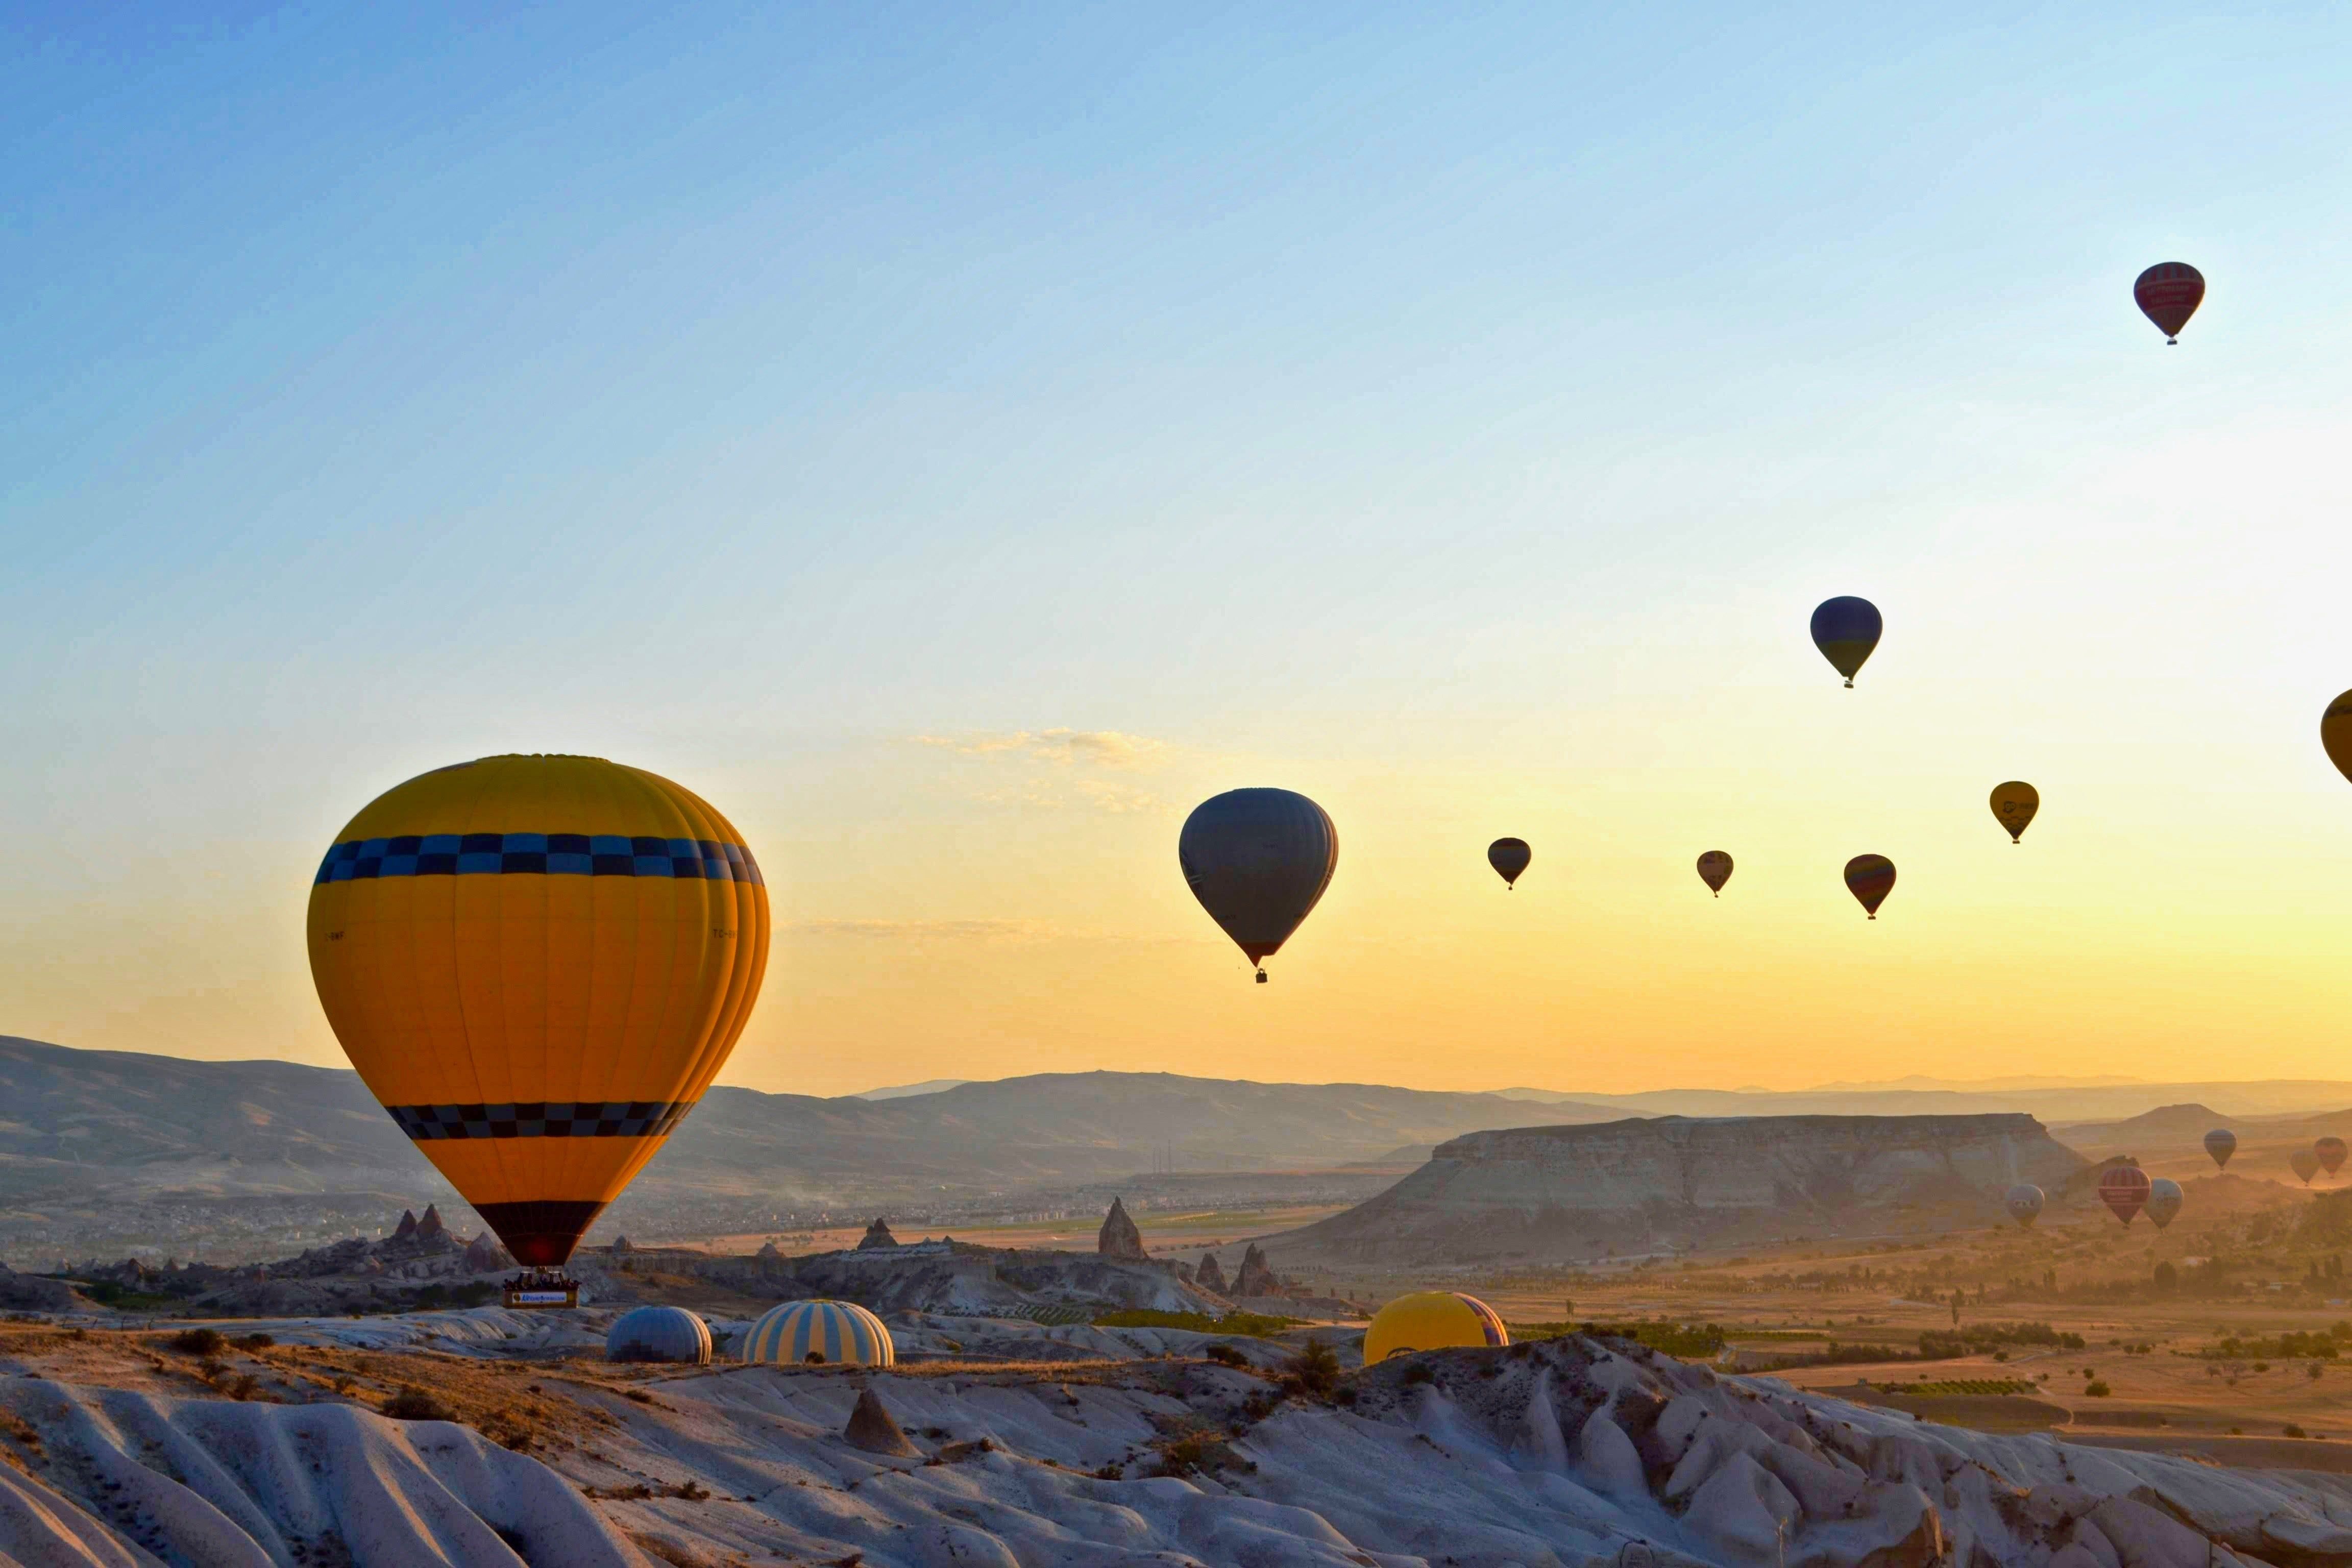 Cappadocia 4K wallpaper for your desktop or mobile screen free and easy to download